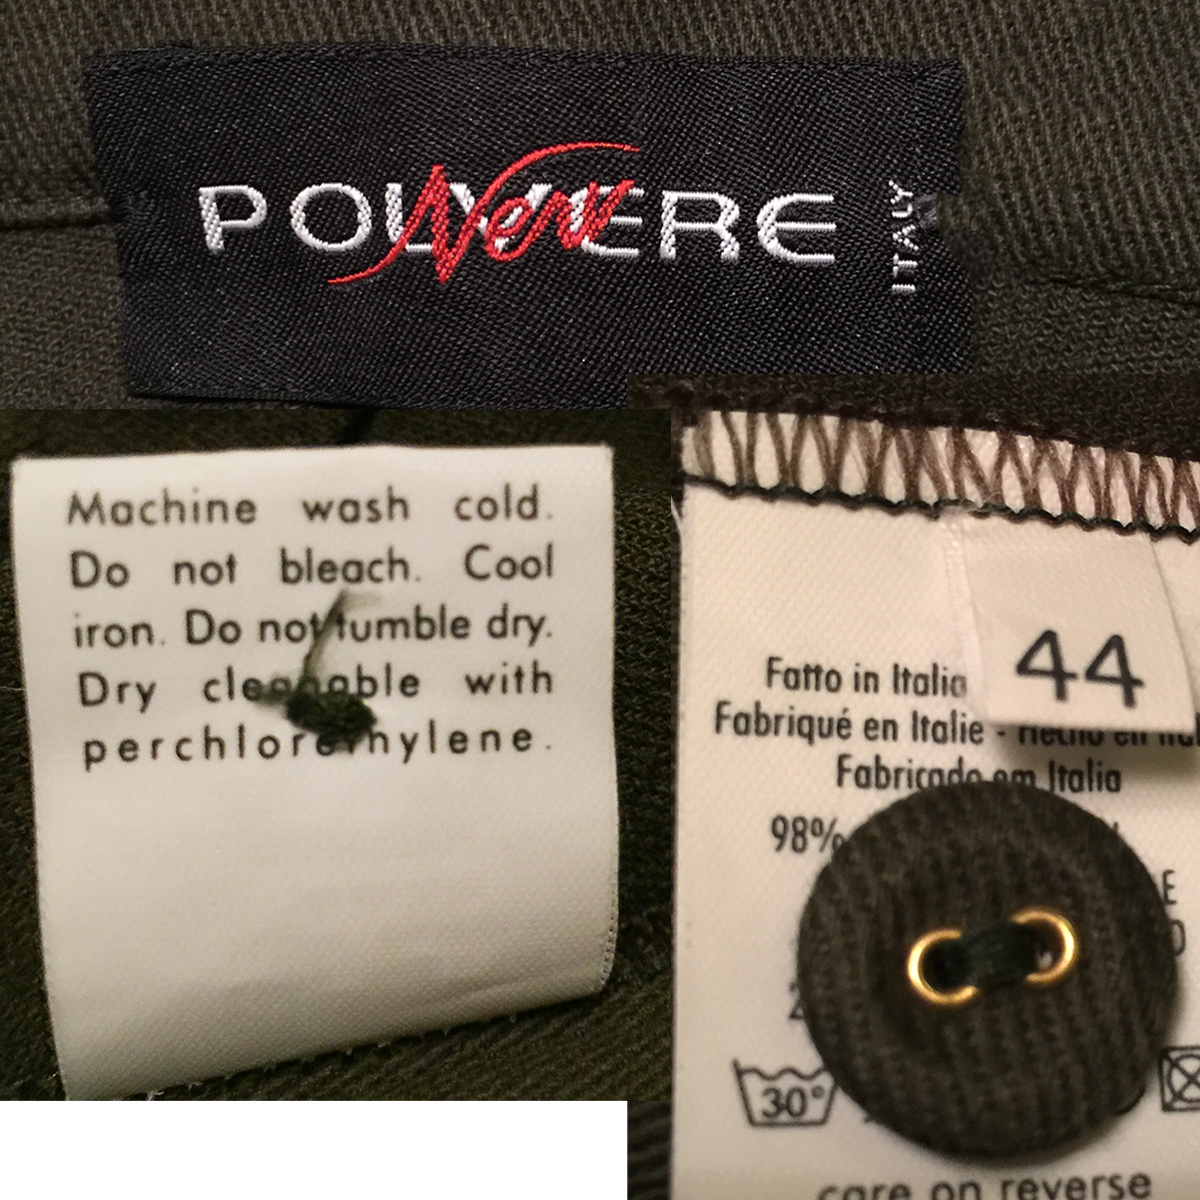 Polyvere clothing label